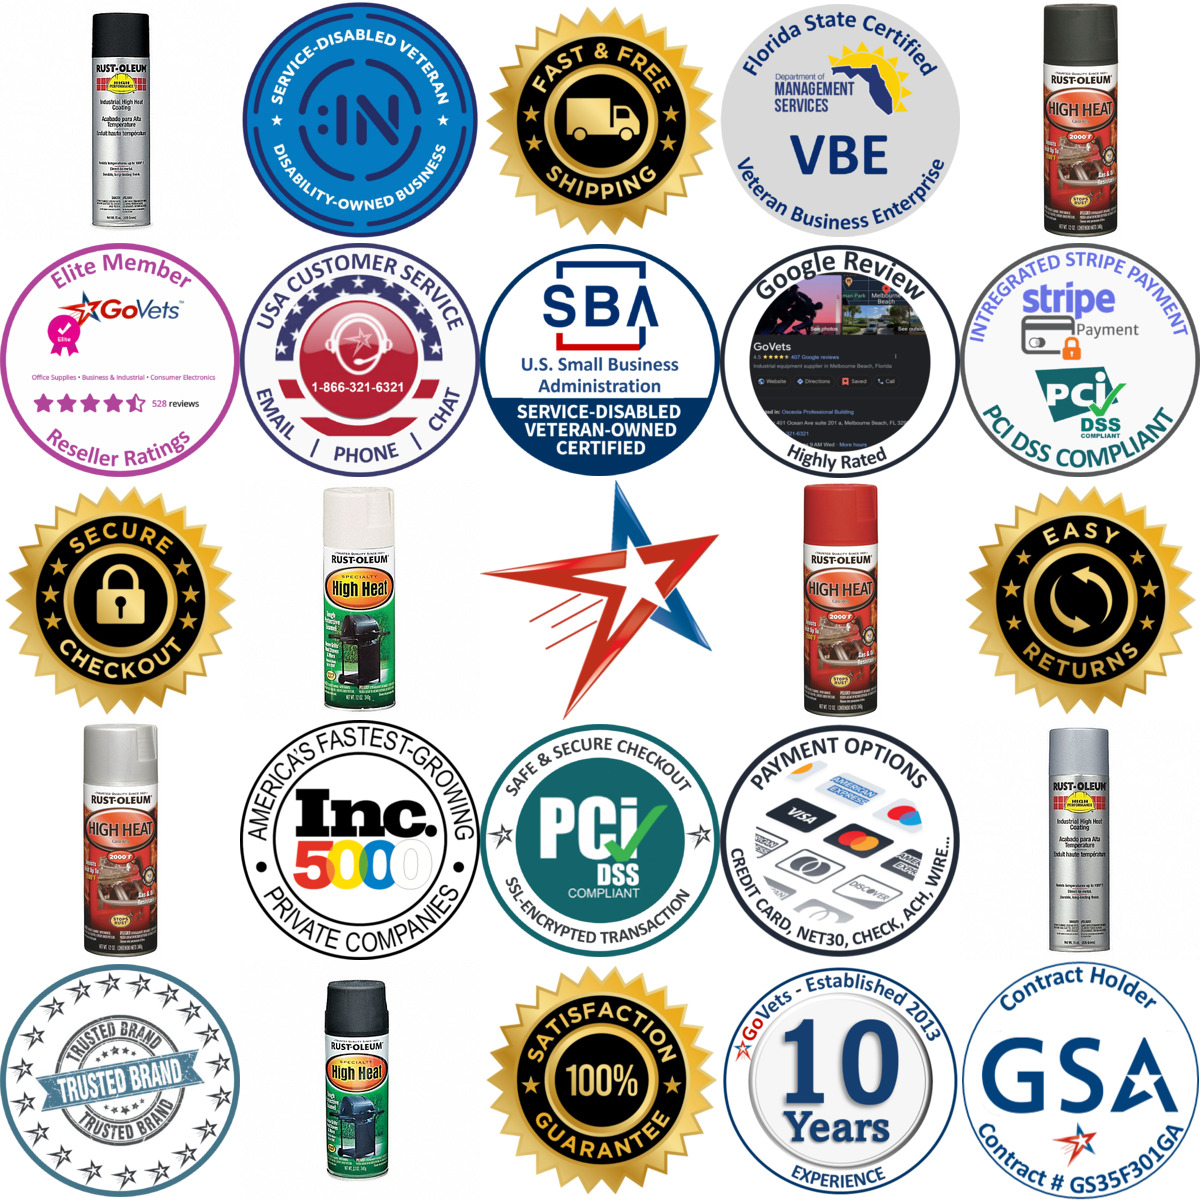 A selection of Silicone Based Spray Paints products on GoVets